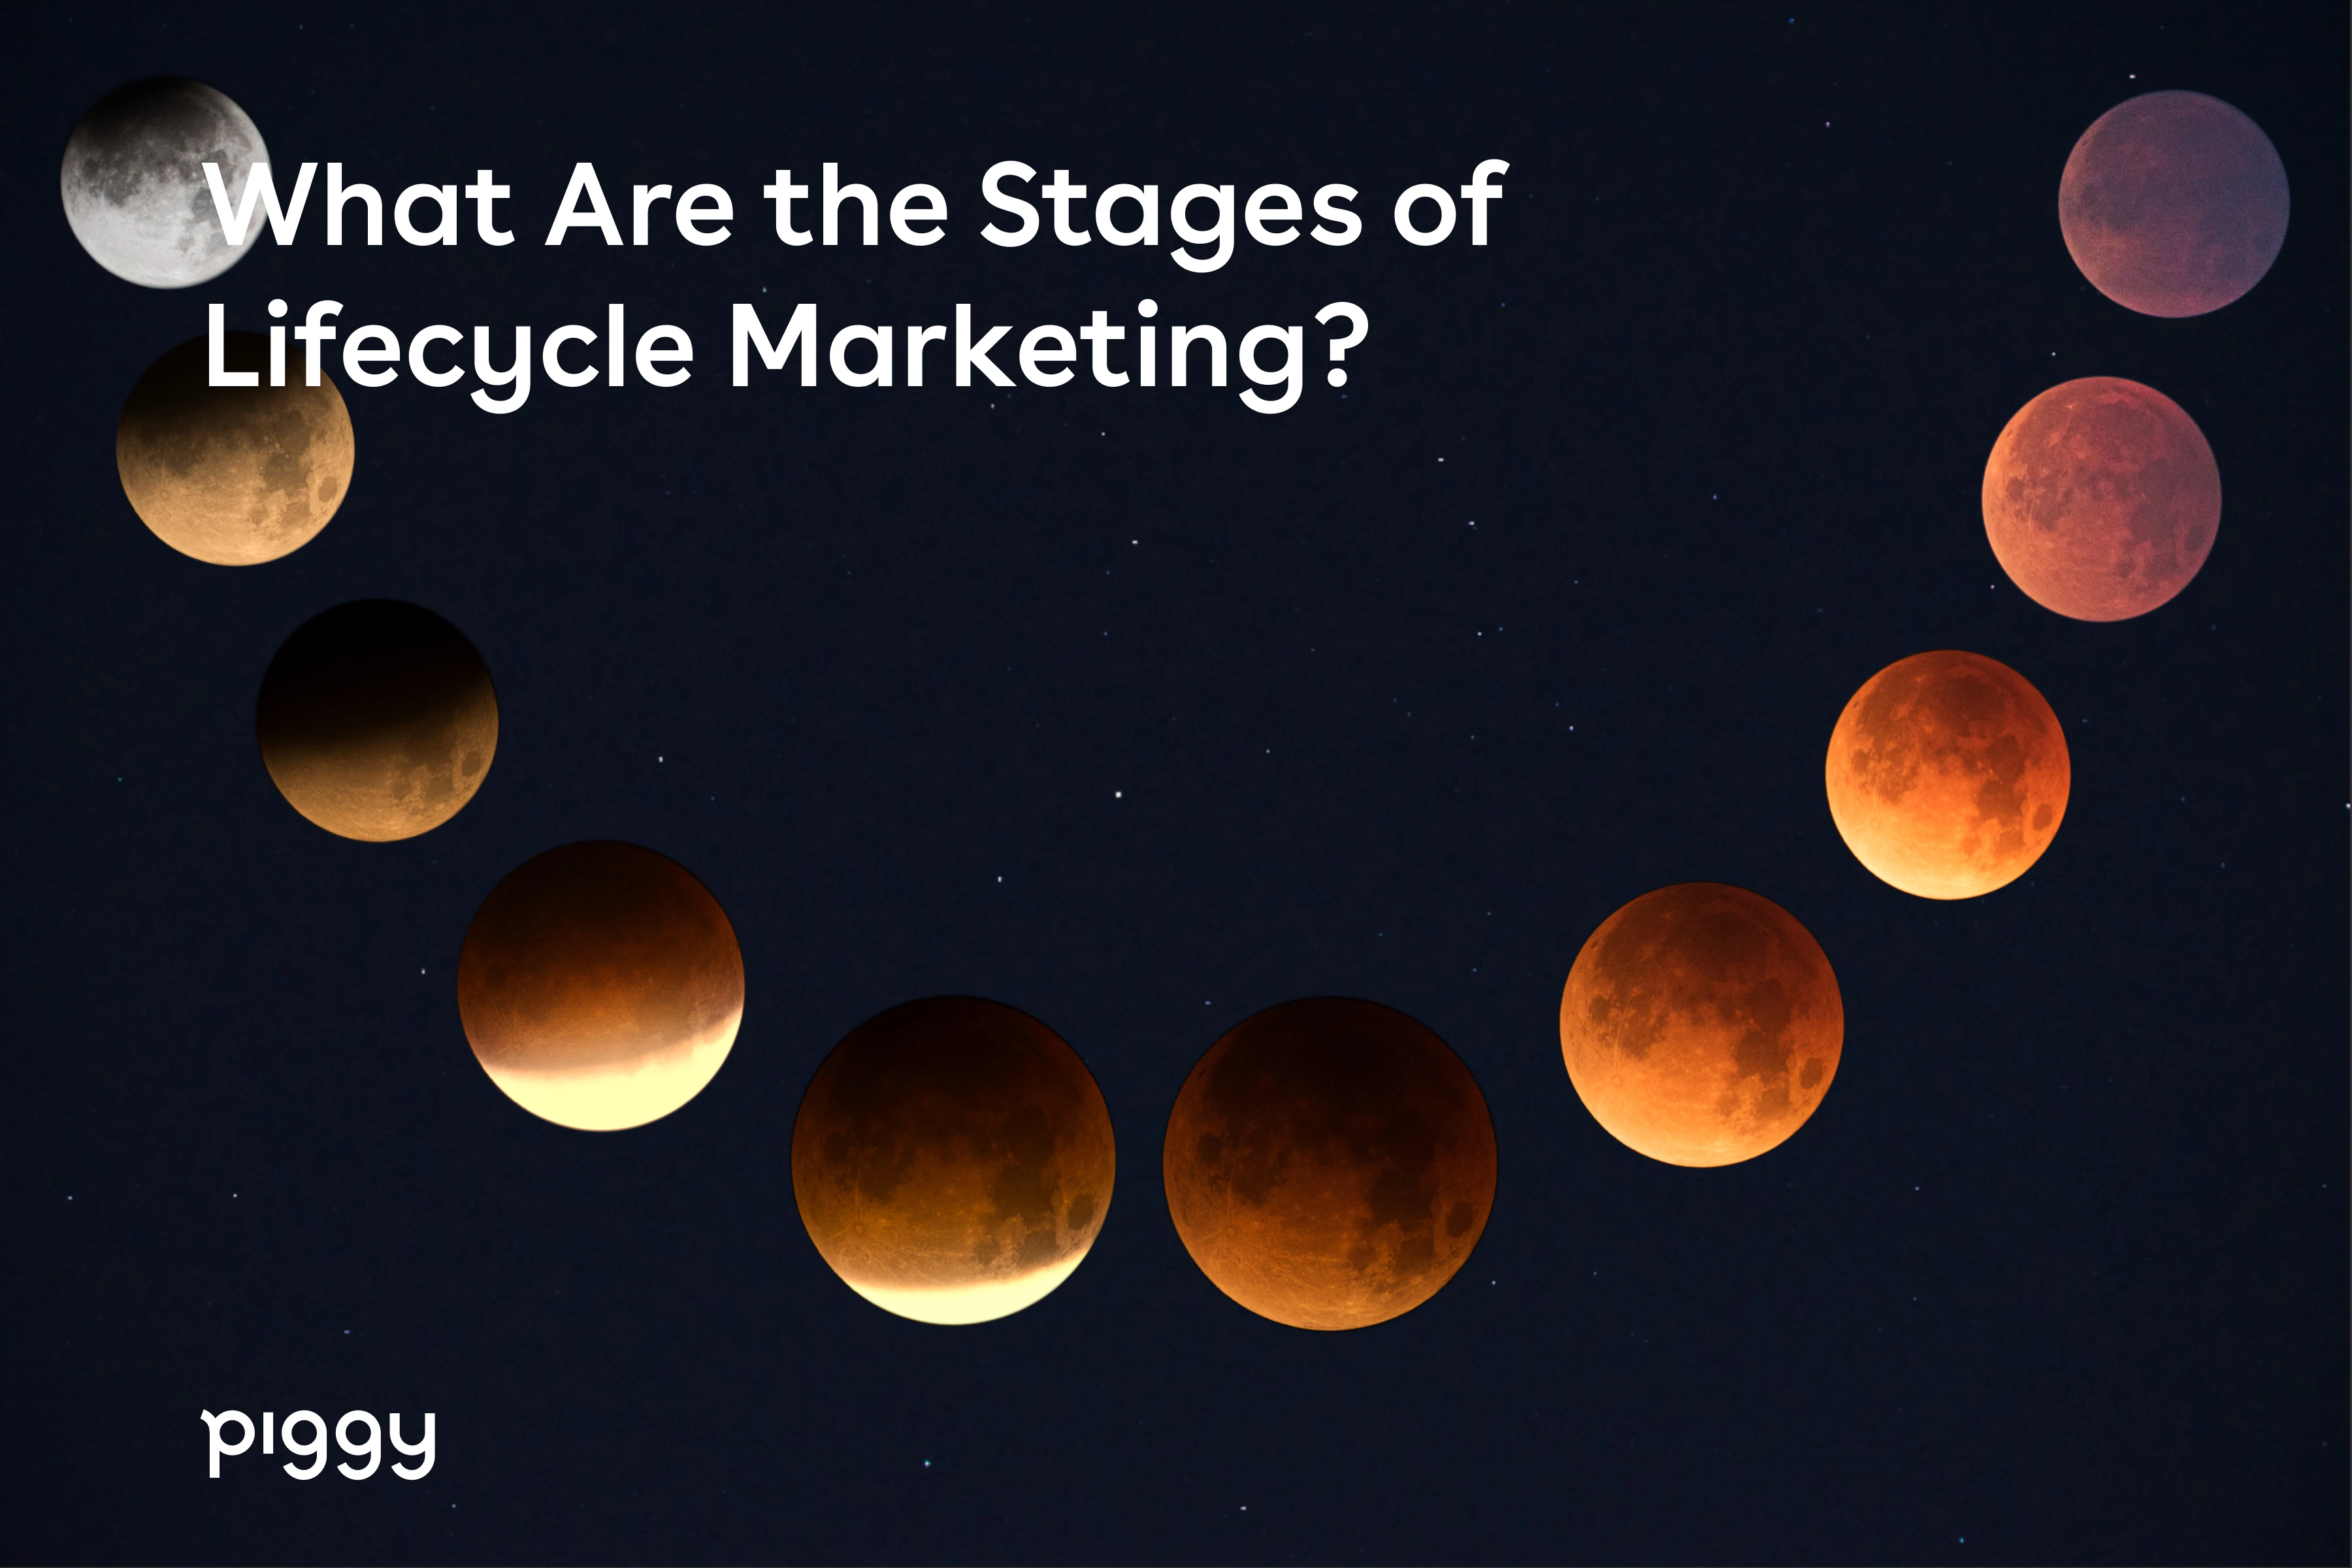 lifecycle-marketing-stages